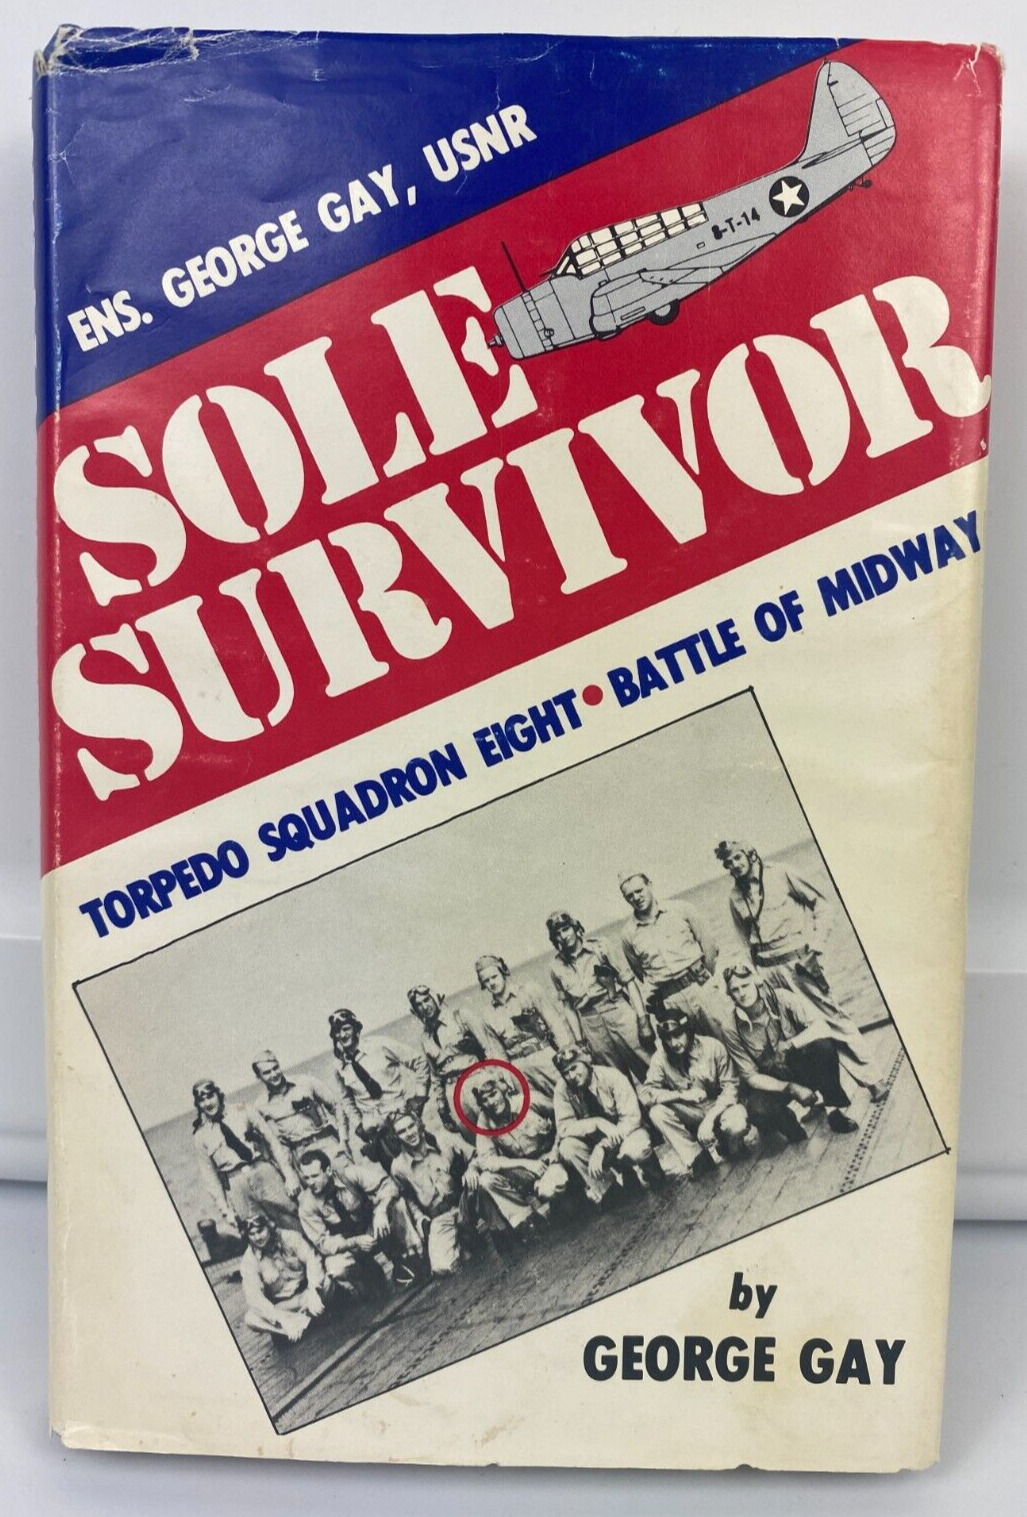 SIGNED Sole Survivor: Torpedo Squadron 8, Battle of Midway George Gay HC